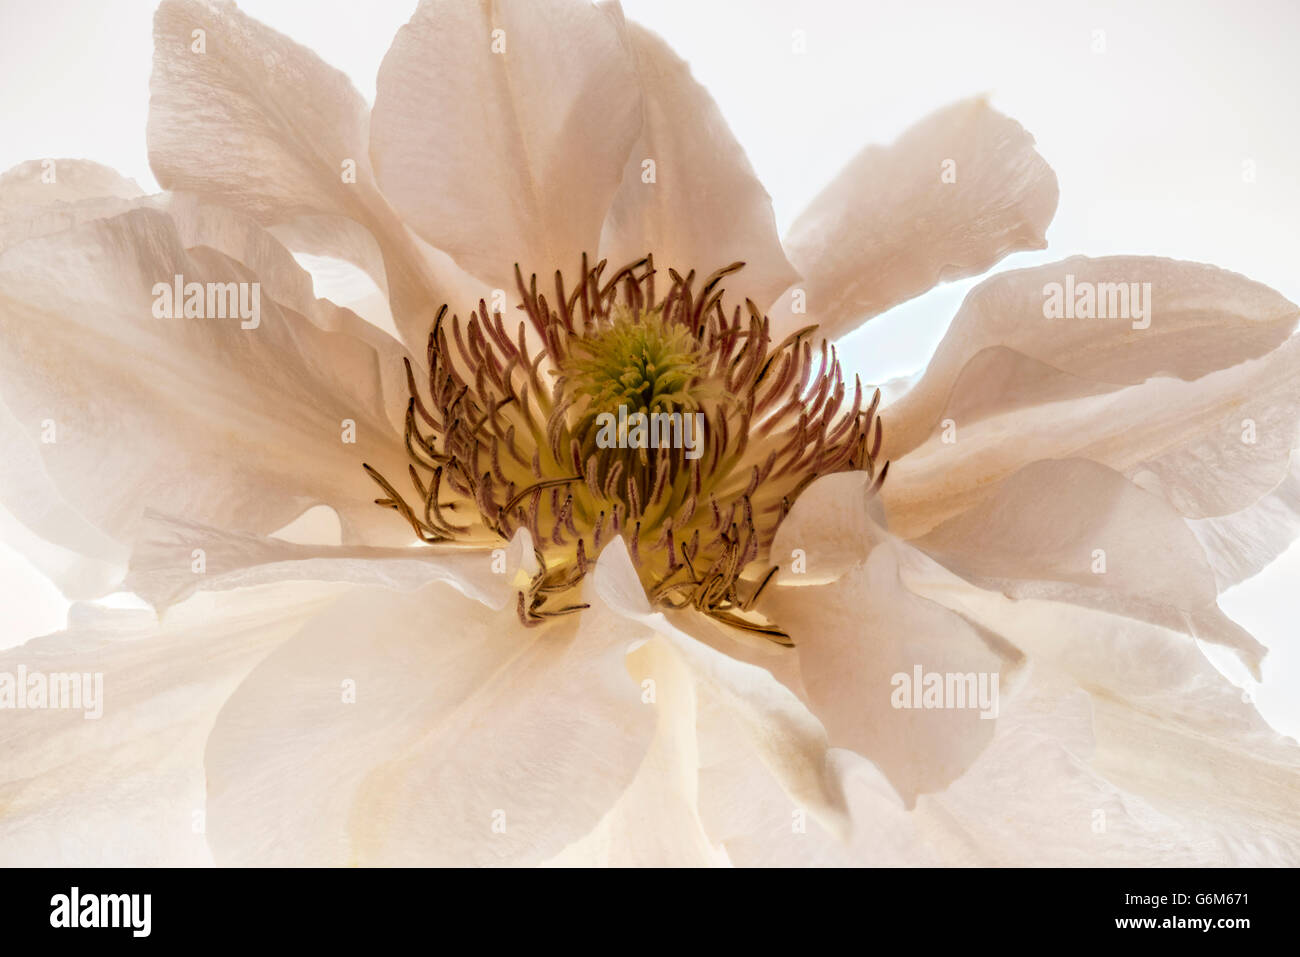 White Clematis. This white Clematis flower has been isolated and back lit to show its beauty and delicate petal structure Stock Photo